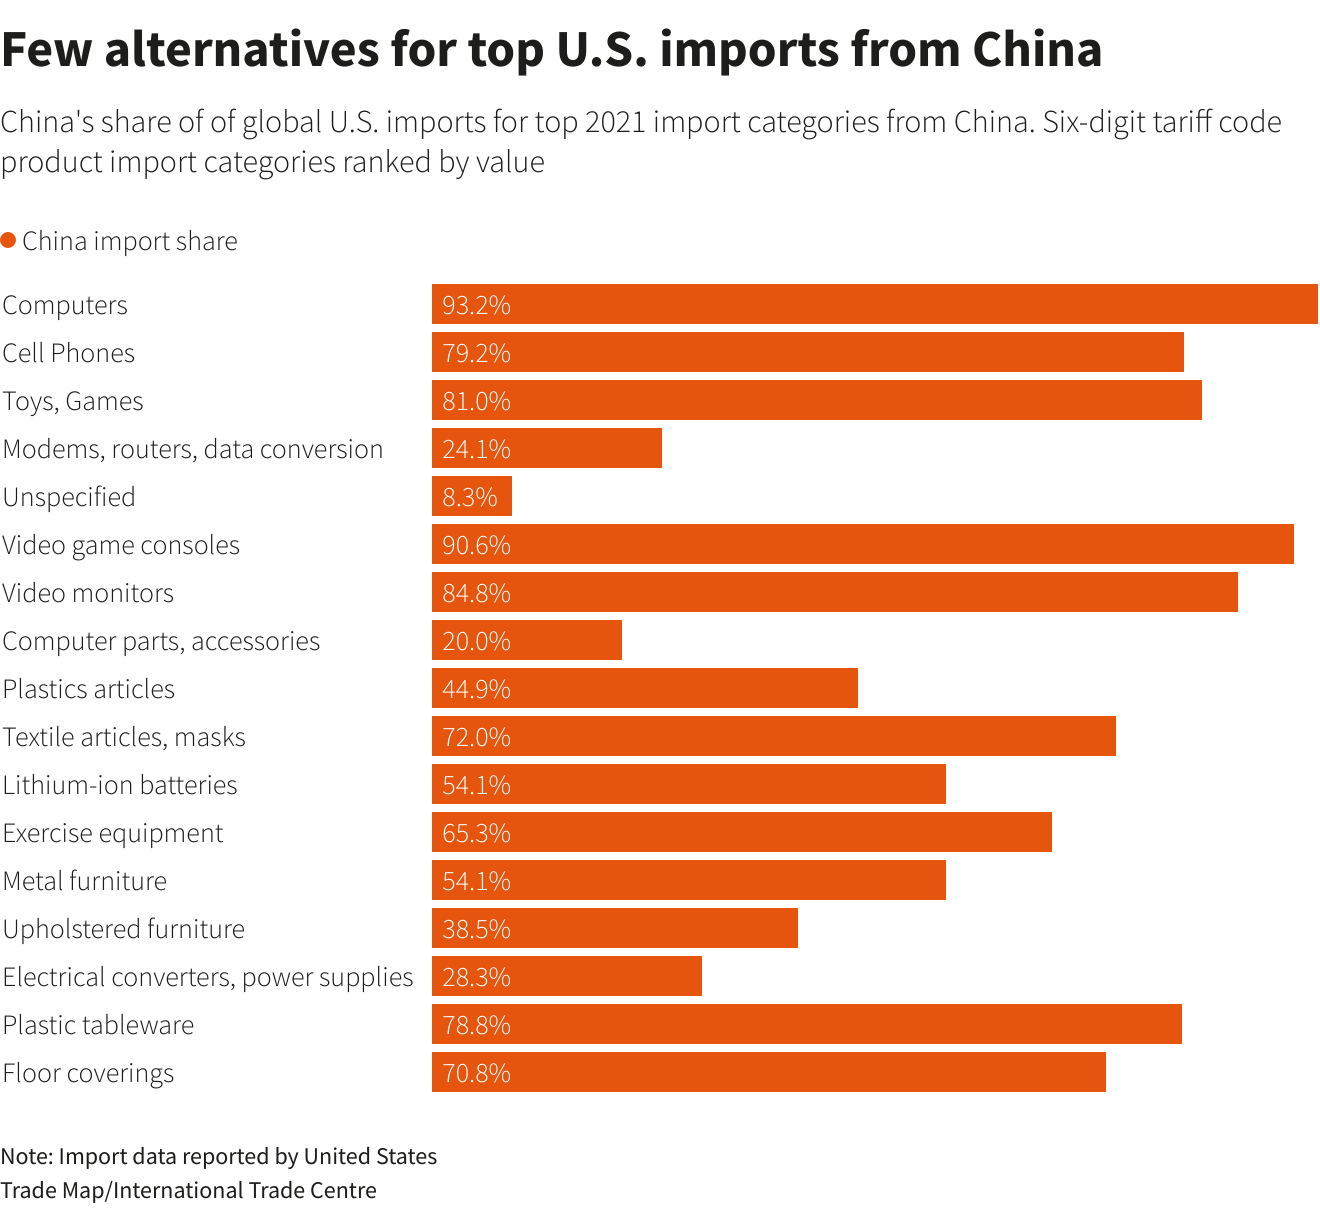 Few alternatives for top U.S. imports from China Few alternatives for top U.S. imports from China